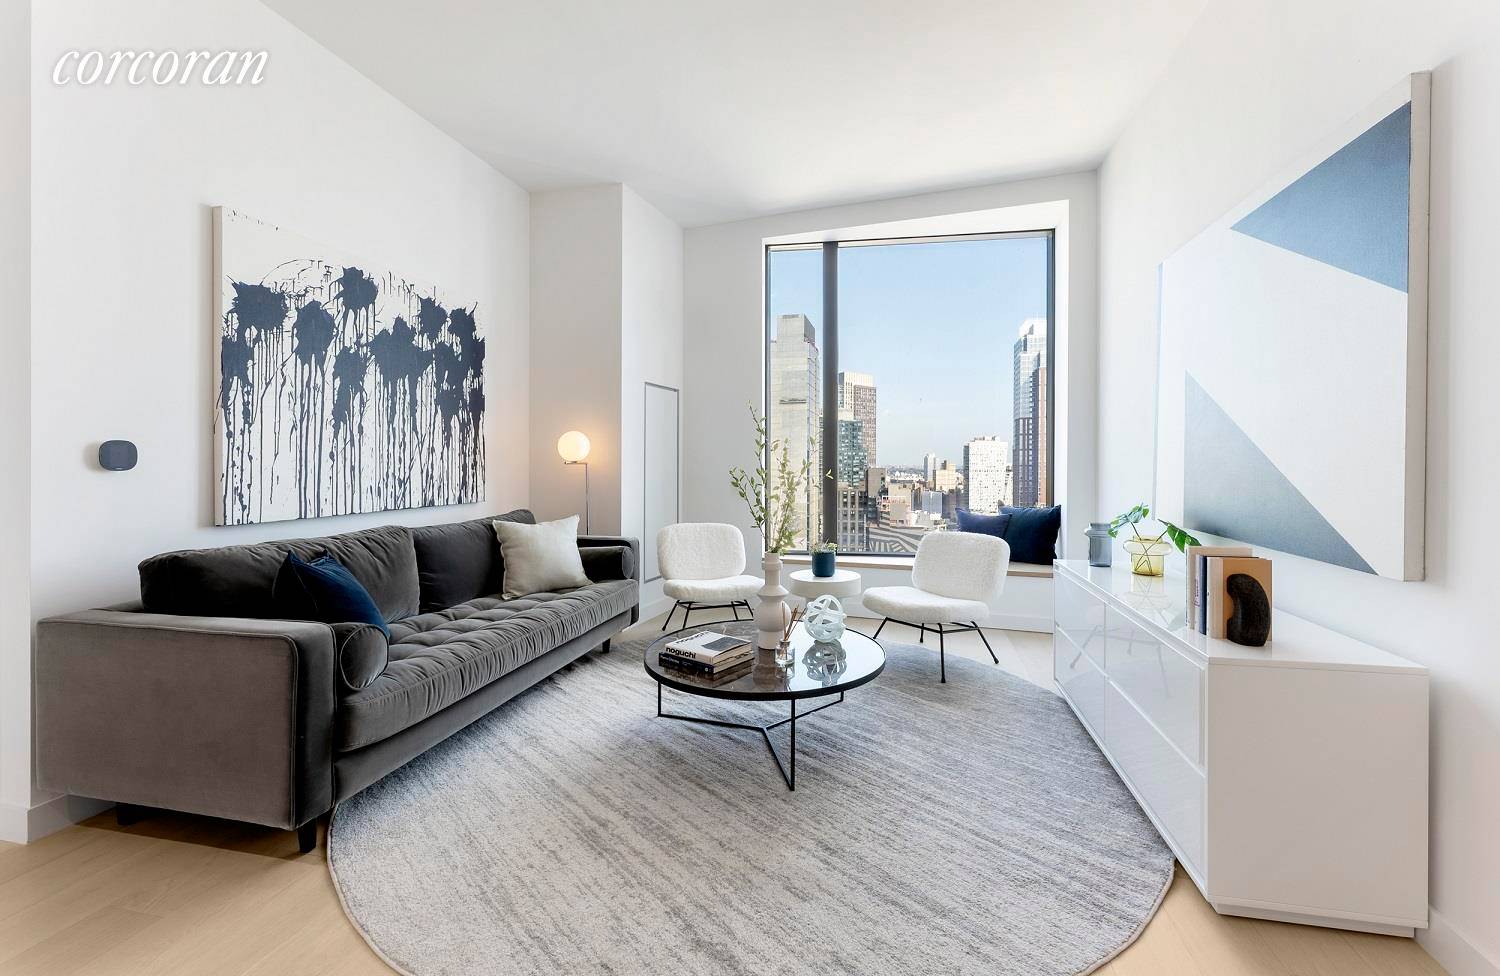 Tishman Speyer's 11 Hoyt sets Brooklyn's new standard for architecture and design.